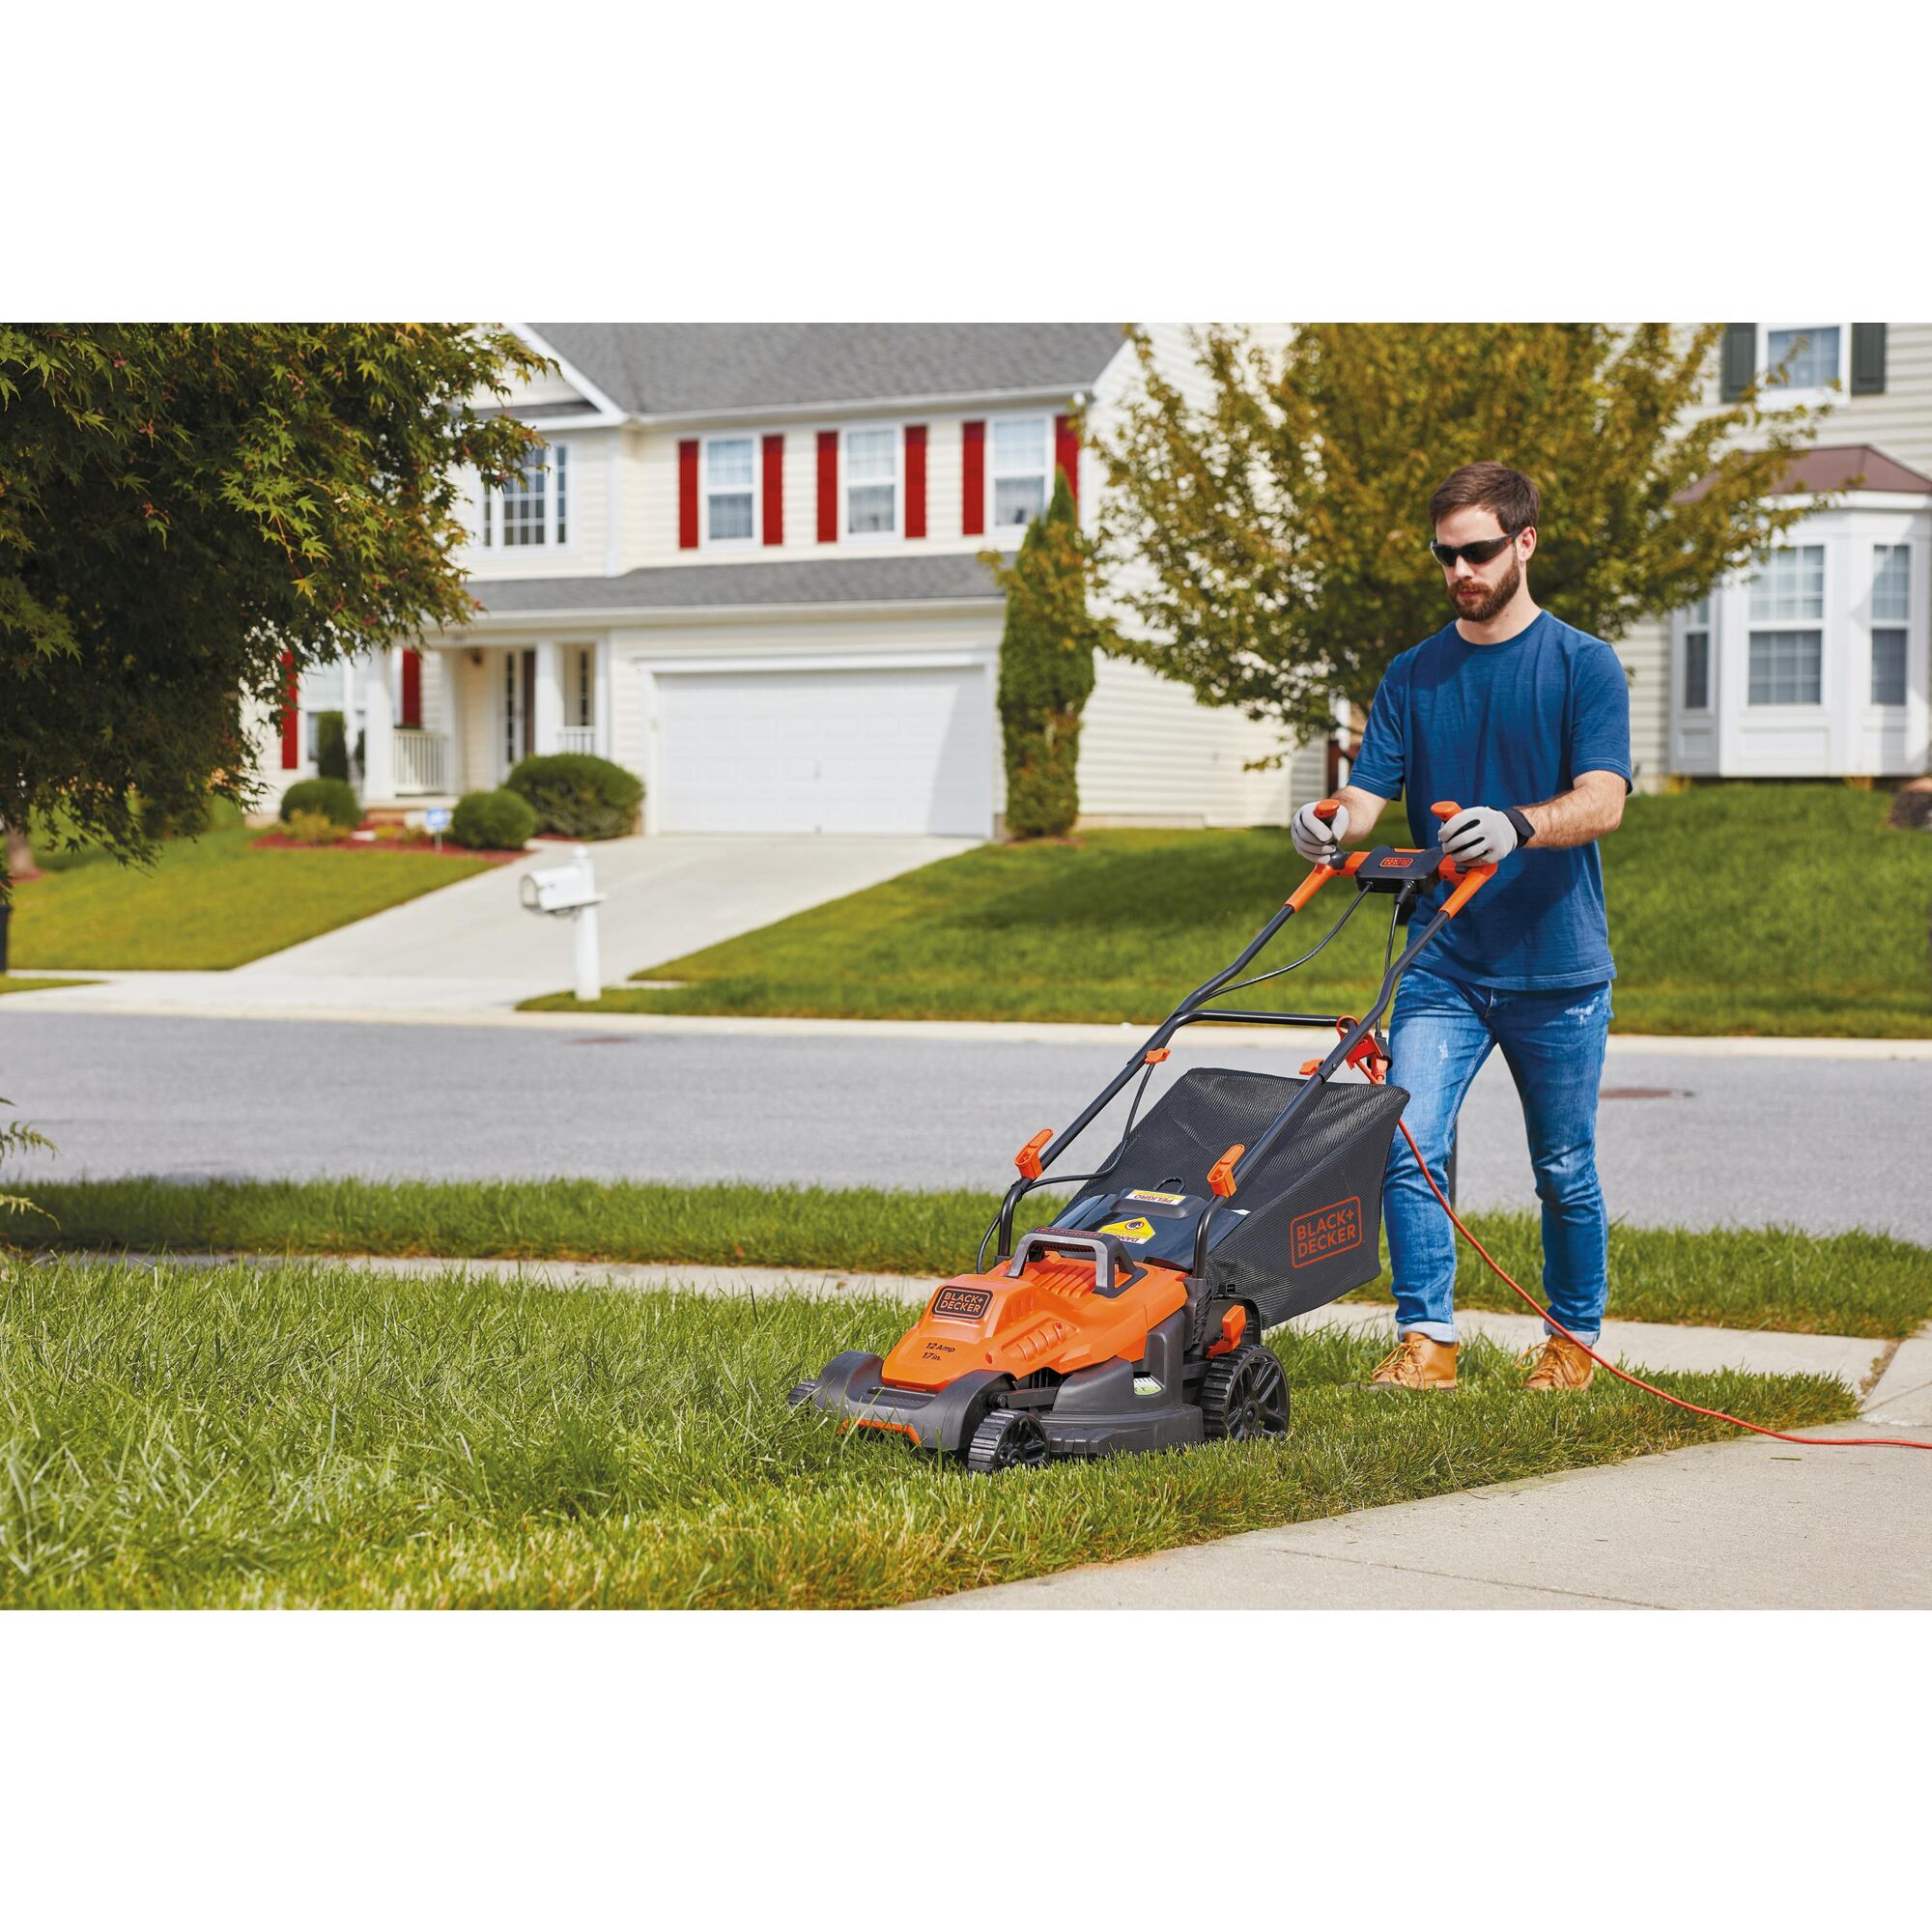 Black and decker 12 amp 17 inch electric lawn mower with comfort grip handle being used to cut grass.